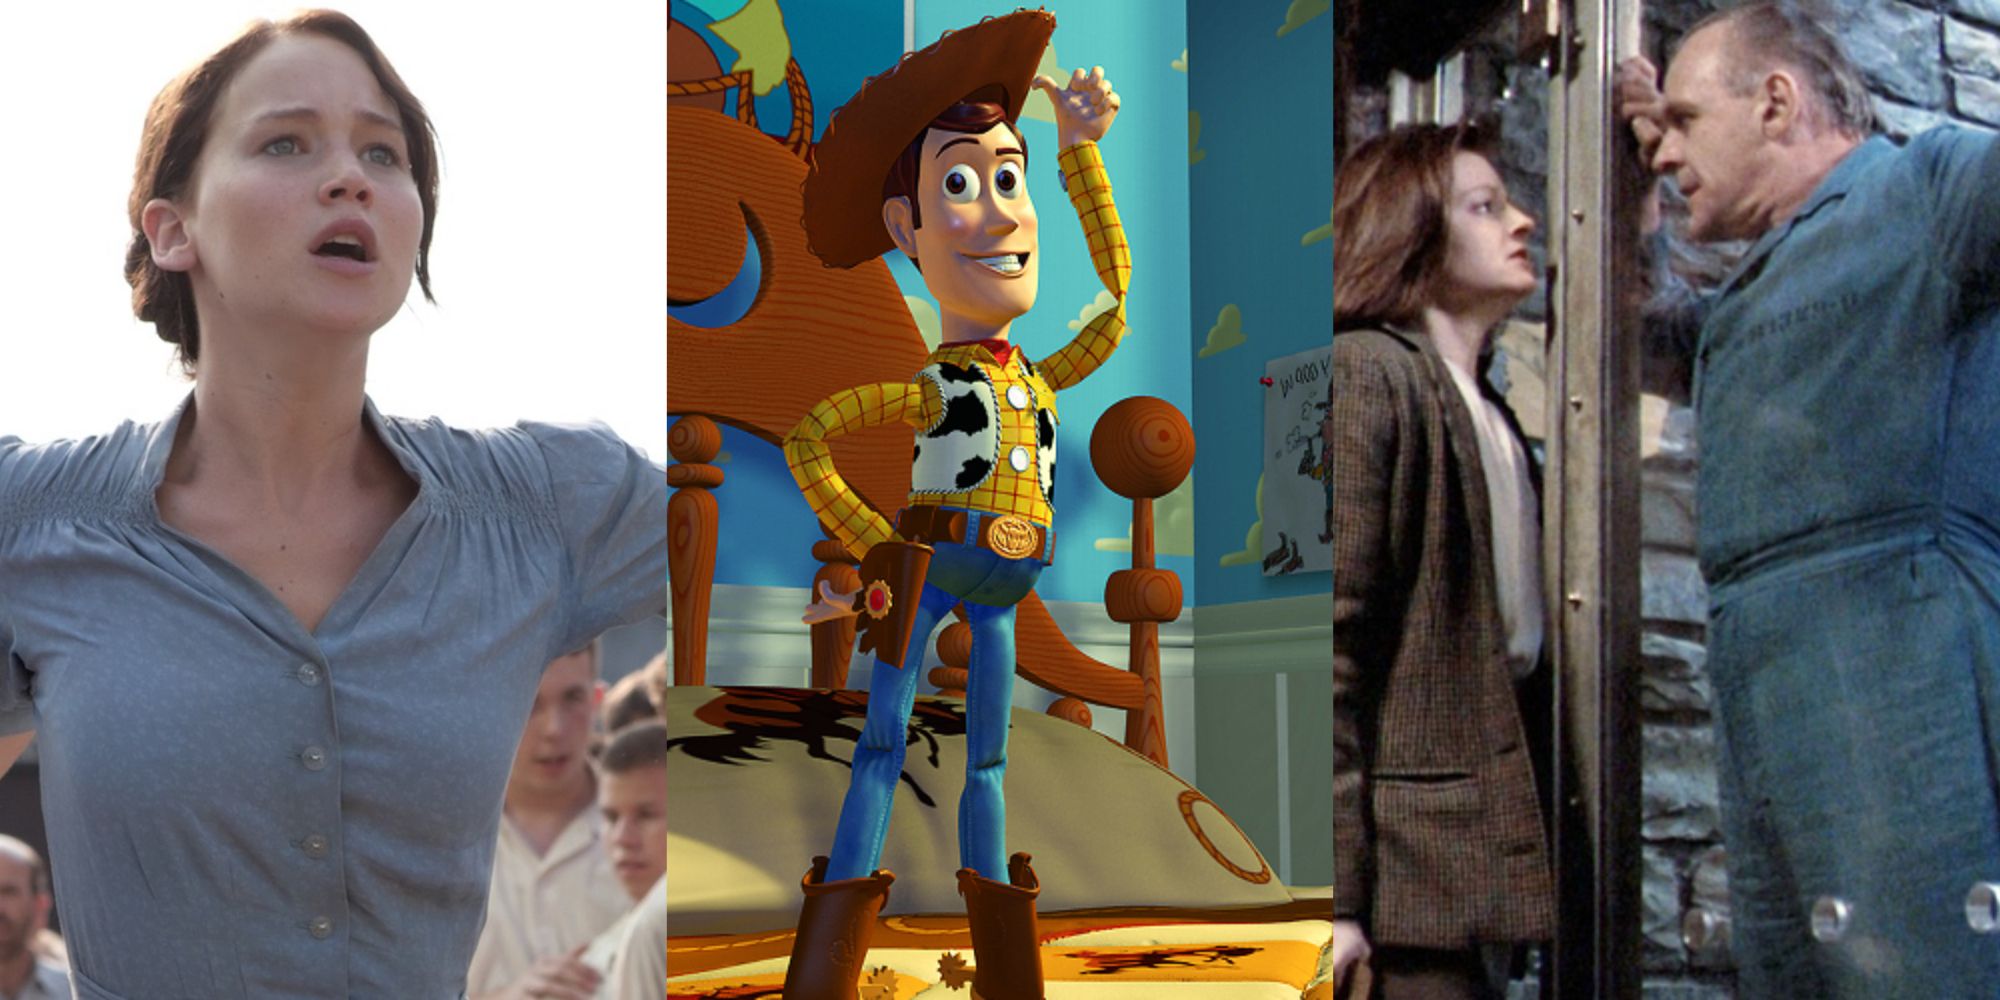 Split image of stills form The Hunger Games, Toy Story, and Clarice and The Silence of the Lambs